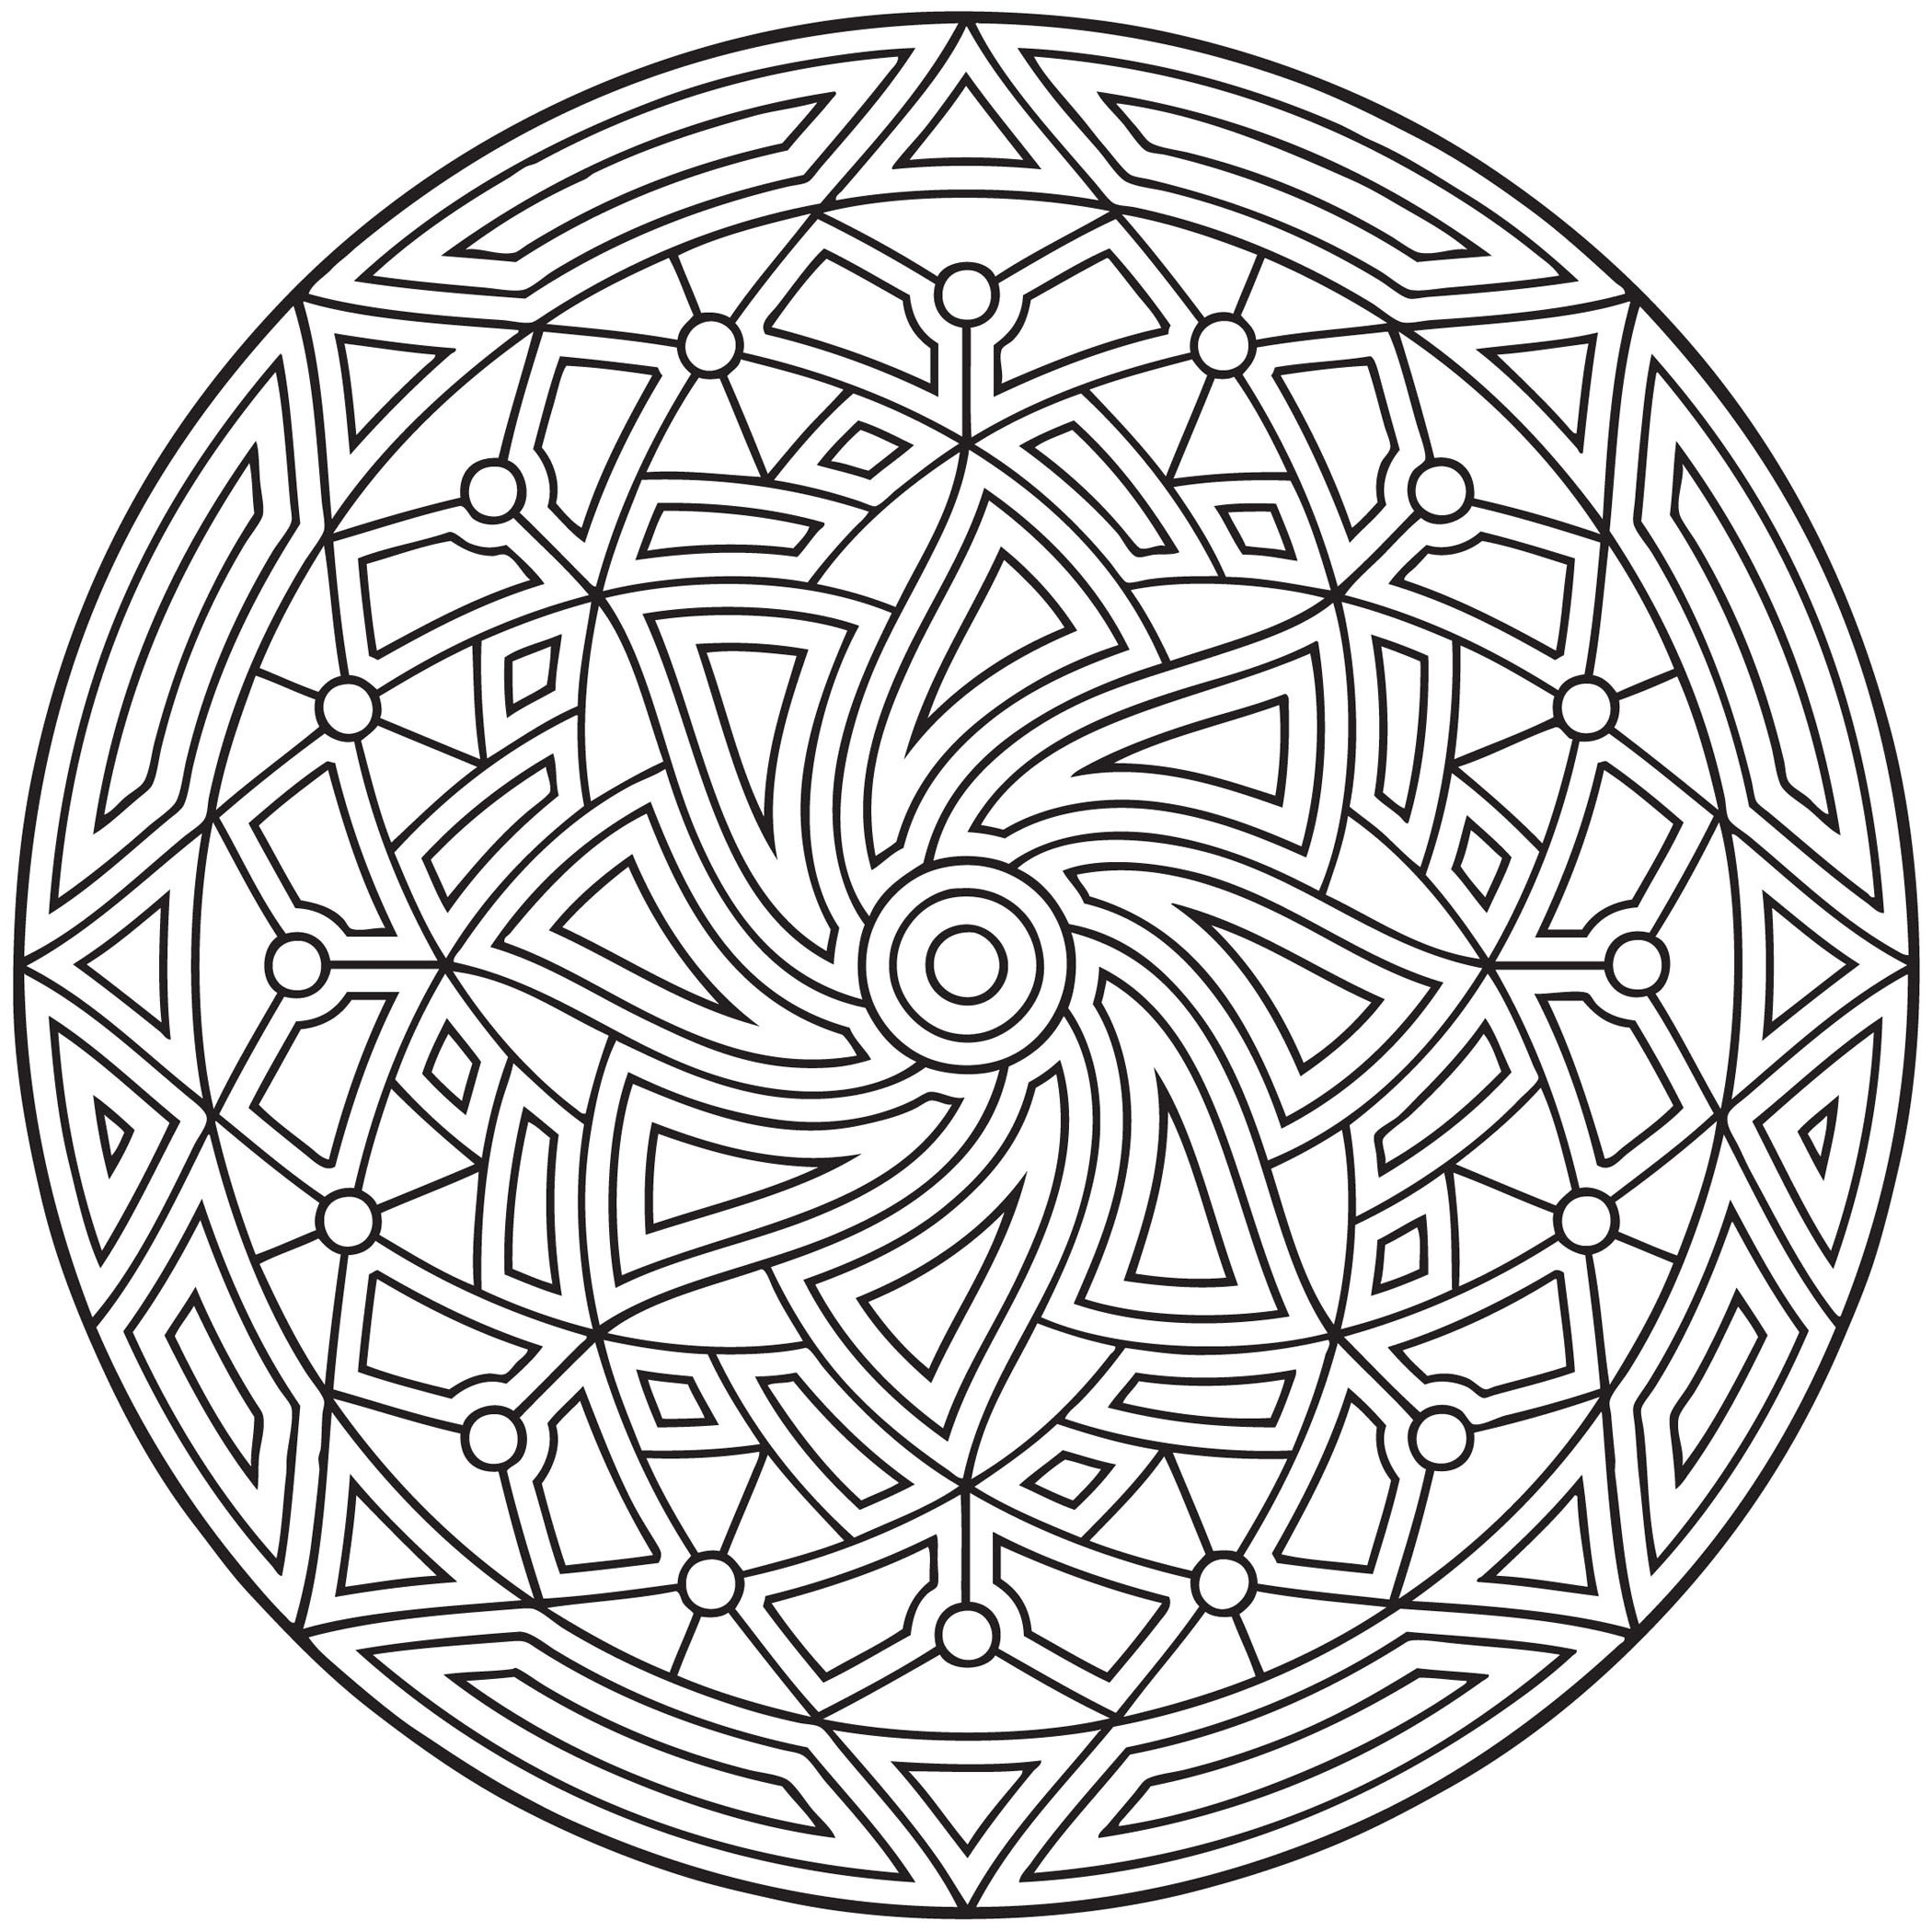 Printable Geometric Coloring Pages
 Free Printable Geometric Coloring Pages For Kids